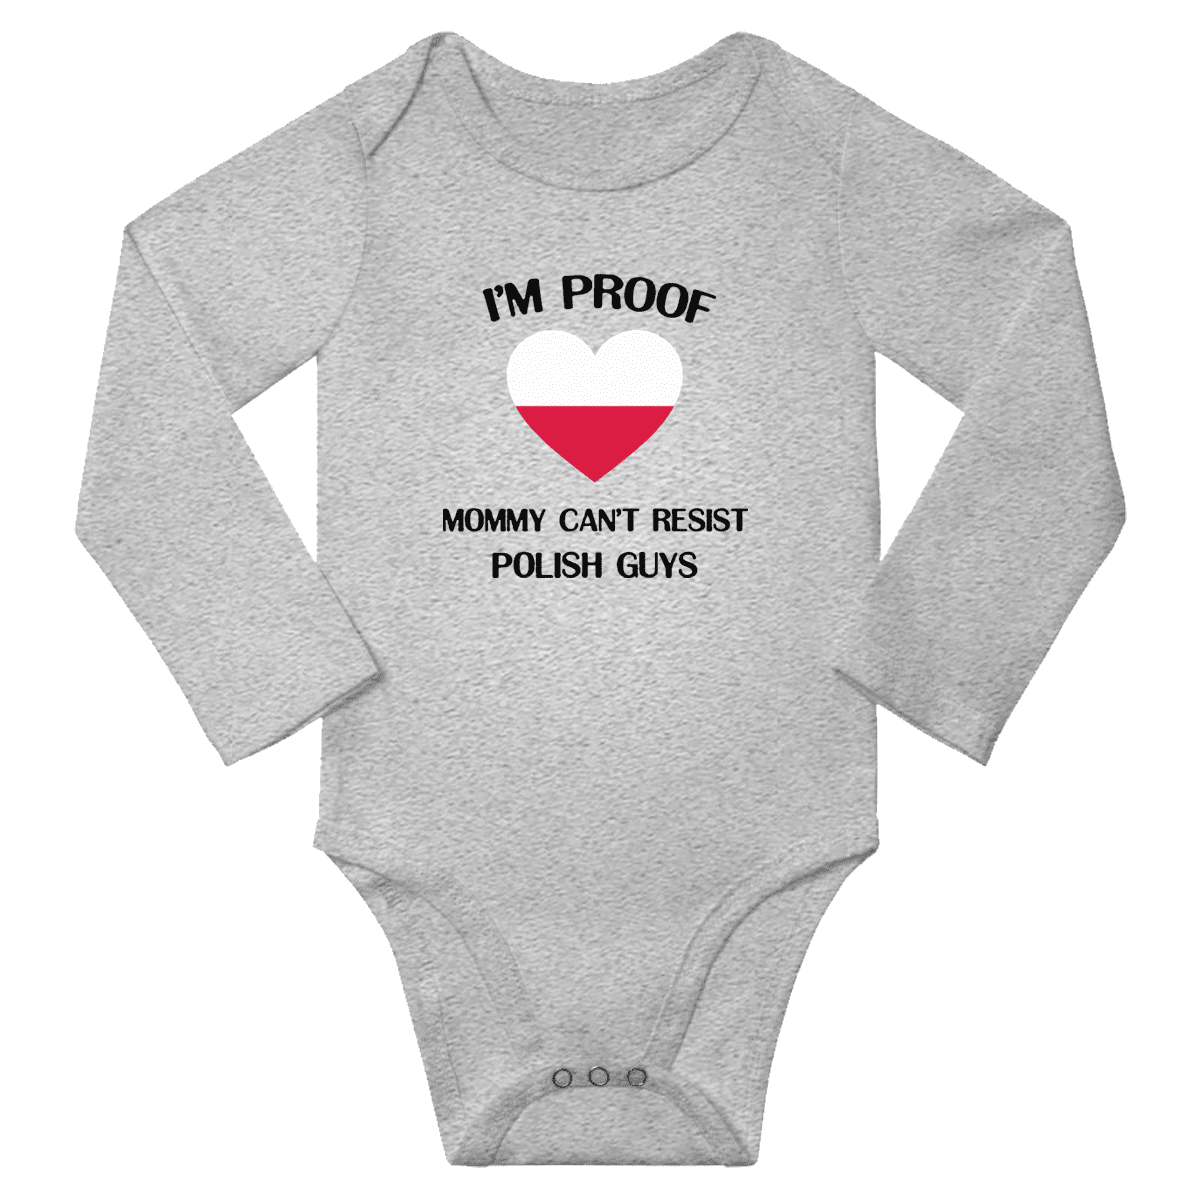 I'm Proof Mommy Can't Resist Polish Guys Baby Long Sleeve Bodysuit Unisex  Gifts (Gray, 12 Months) 